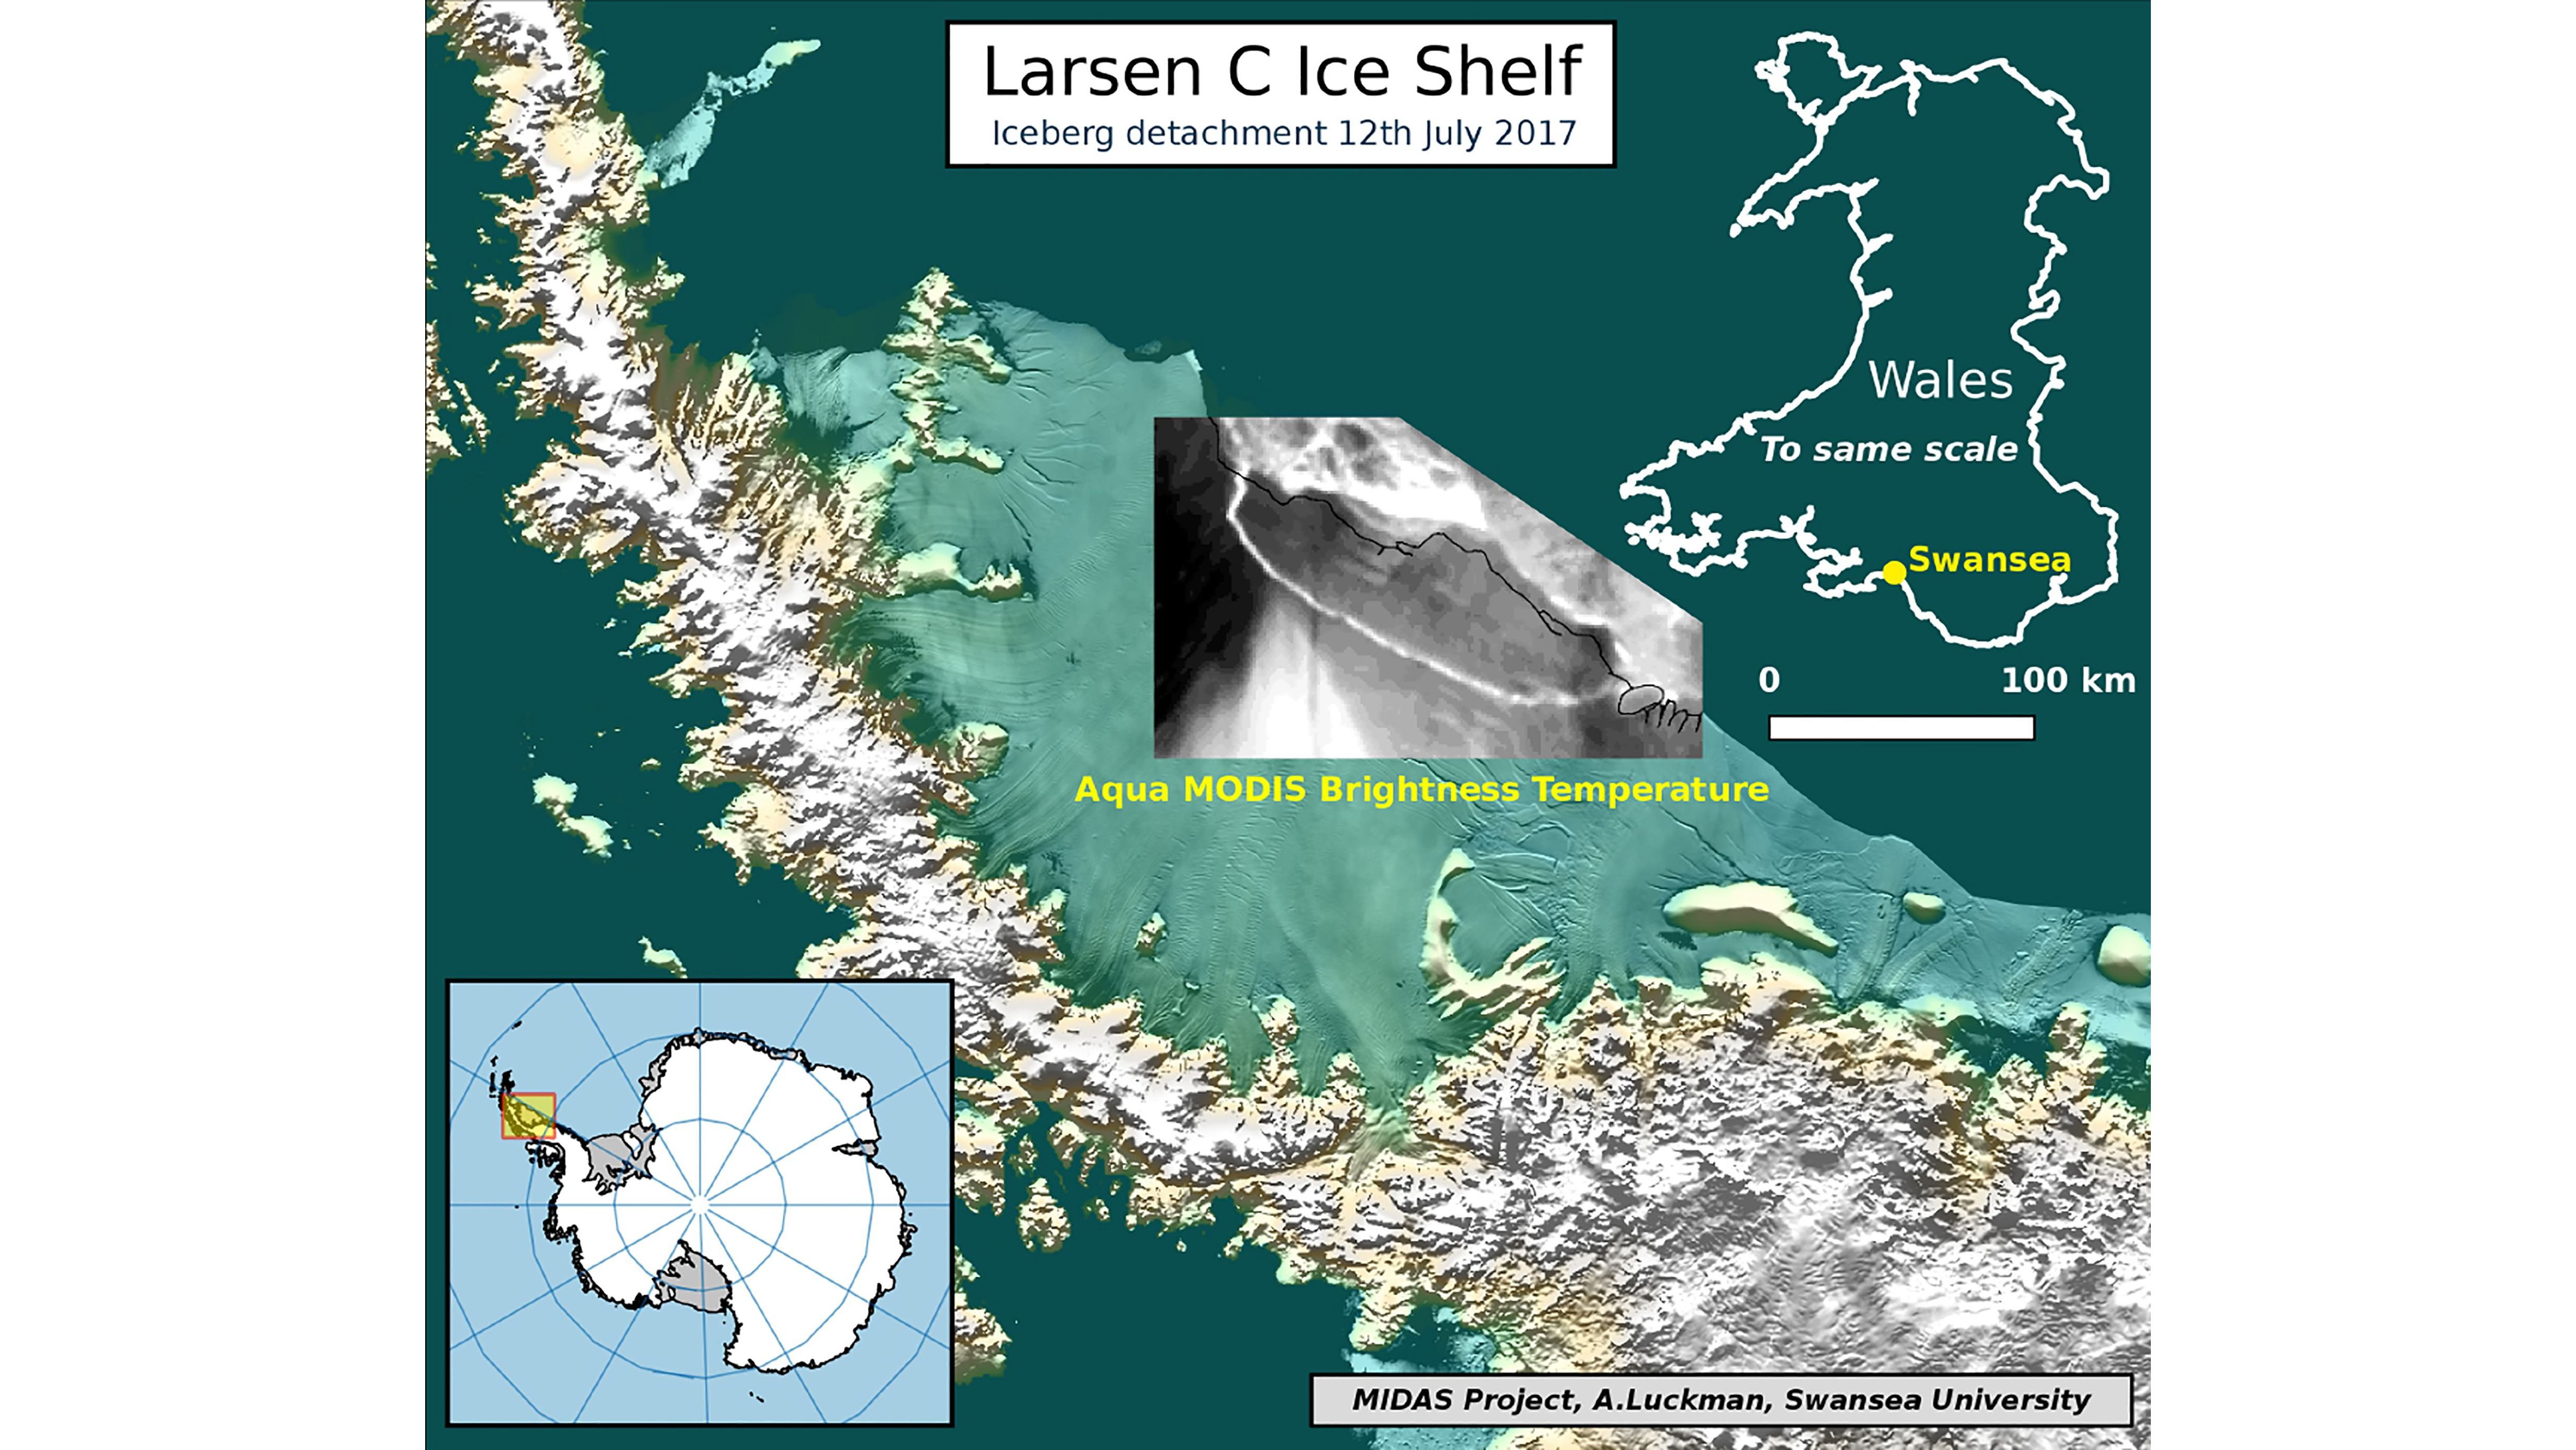 Map showing iceberg detachment based on data from NASA dated July 12.